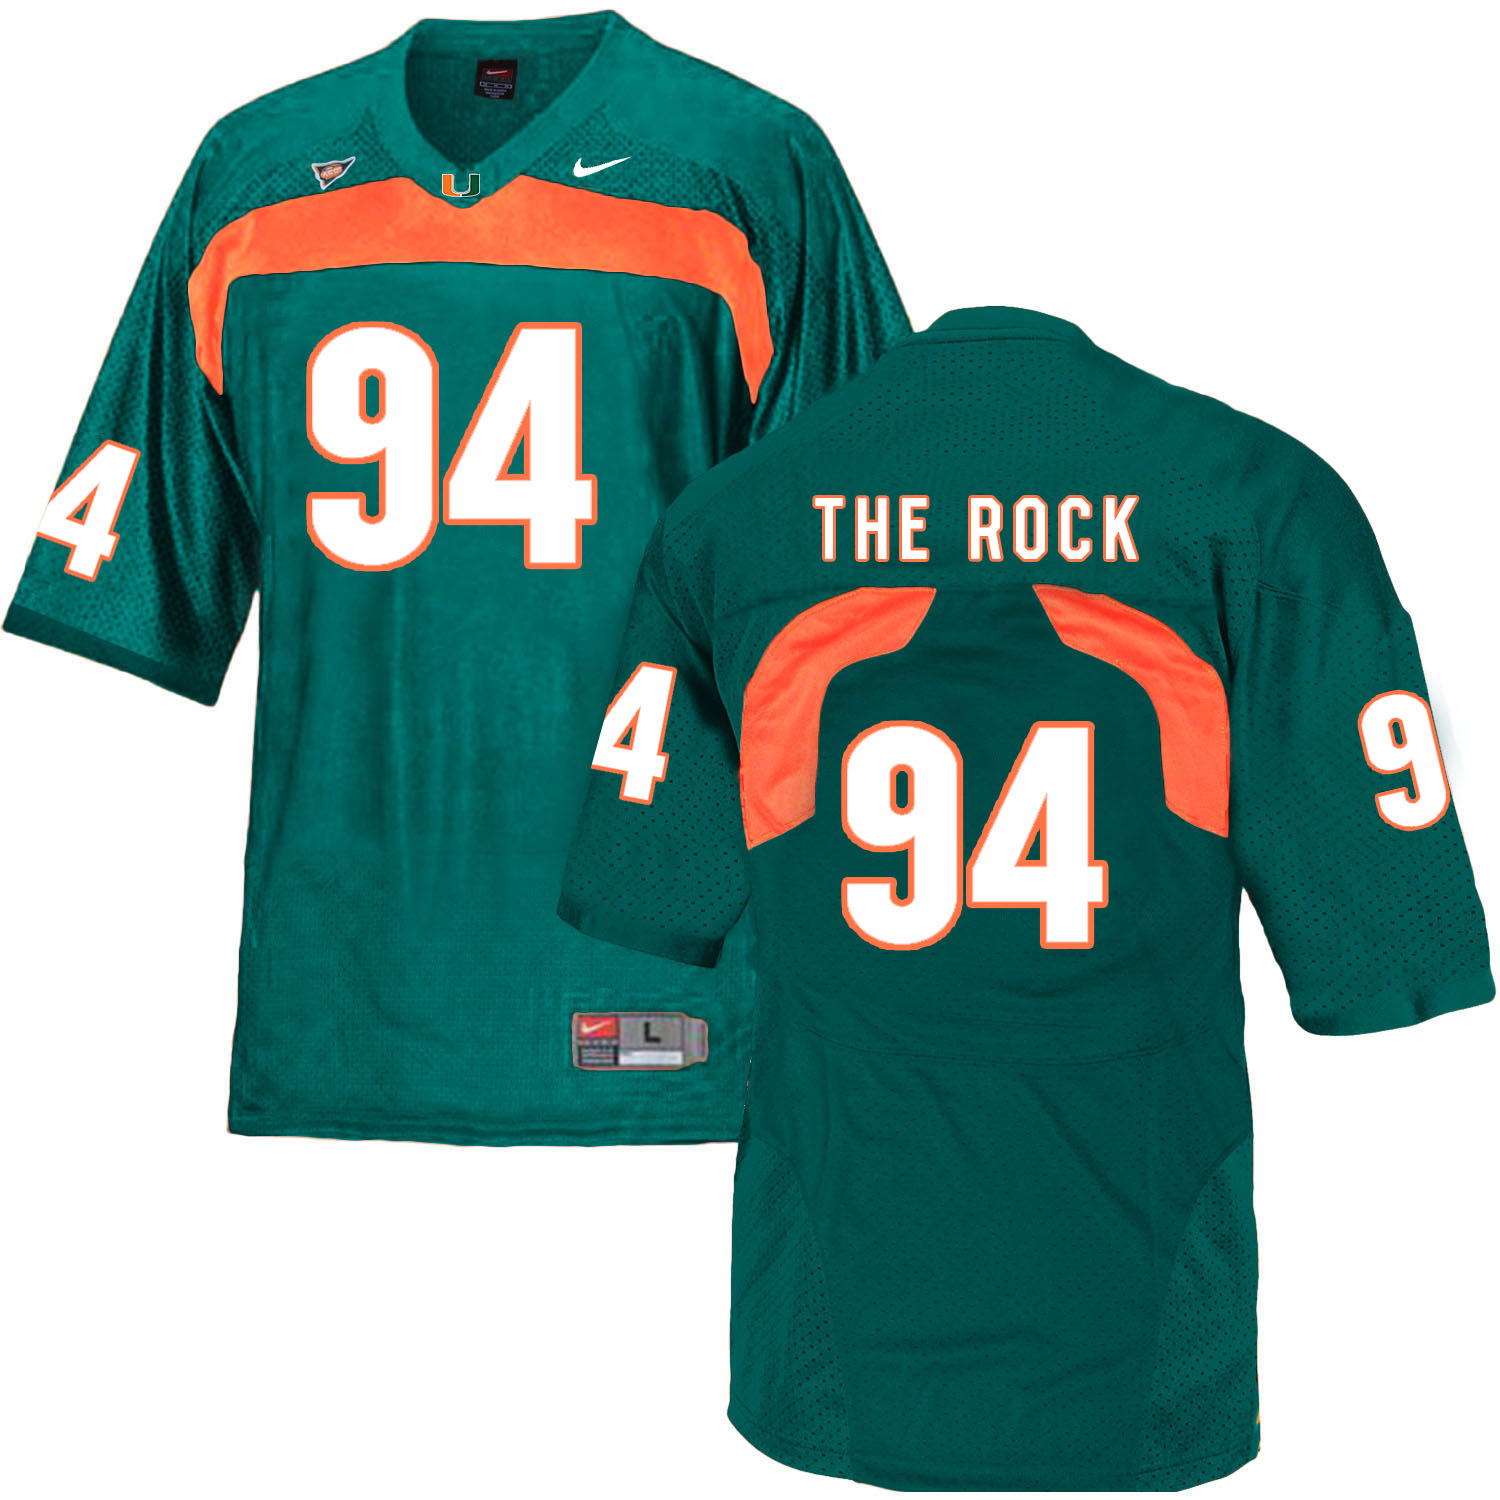 Miami Hurricanes 94 The Rock Green College Football Jersey